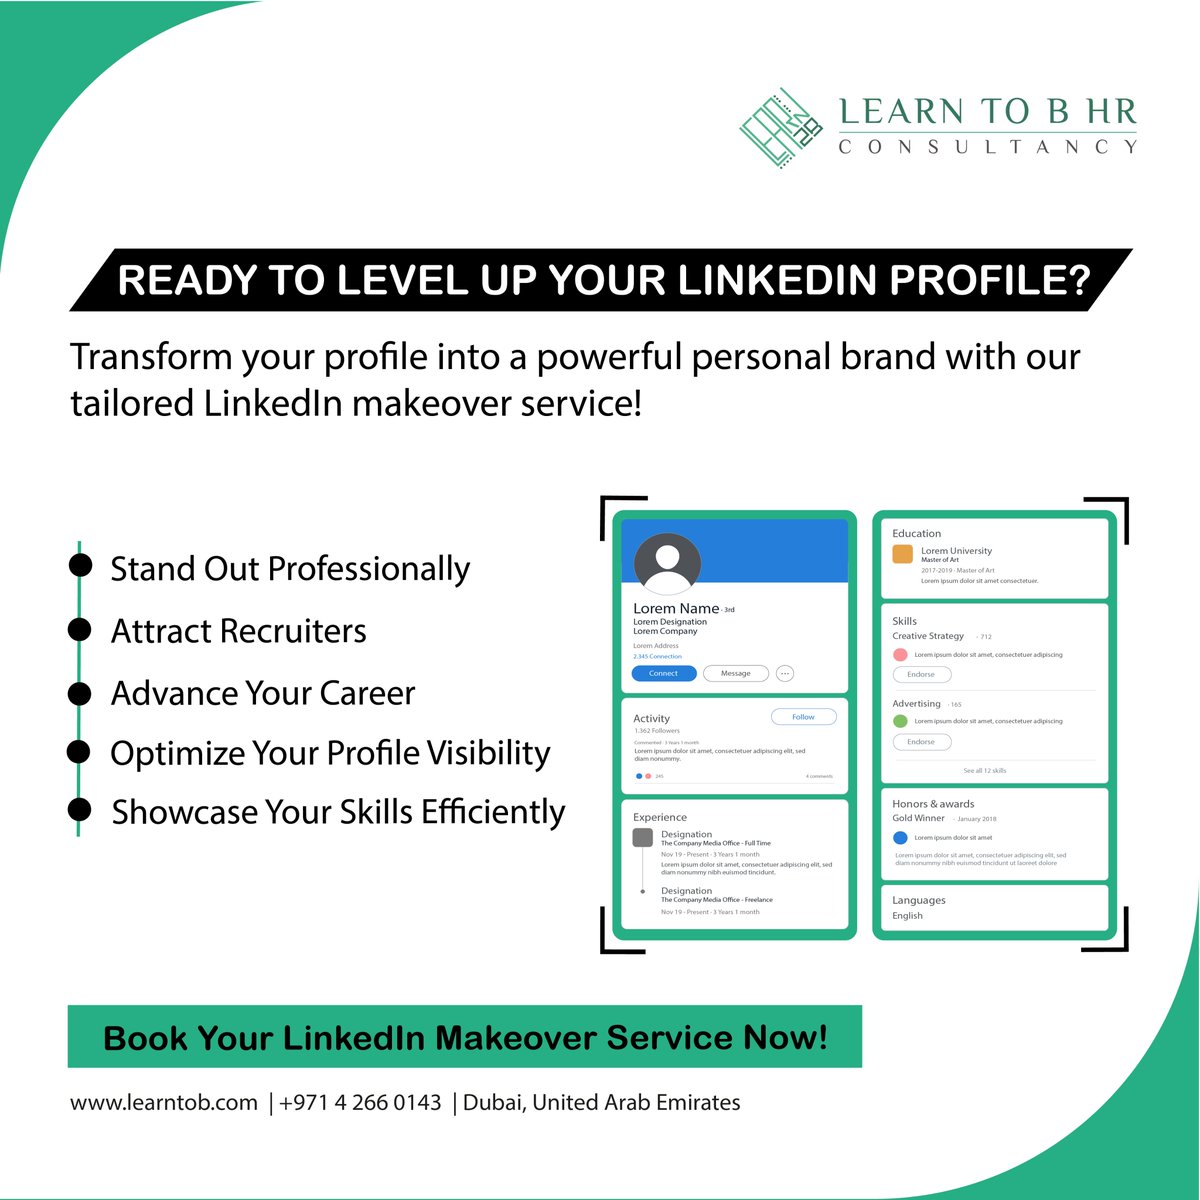 🚀 Ready to level up your LinkedIn profile? 🌟

Transform your profile into a powerful personal brand with our tailored LinkedIn makeover service!
#Learntob #LearnToBHRConsultancy #LinkedInMakeover #PersonalBrand #CareerAdvancement #ProfessionalNetworking #JobSearch